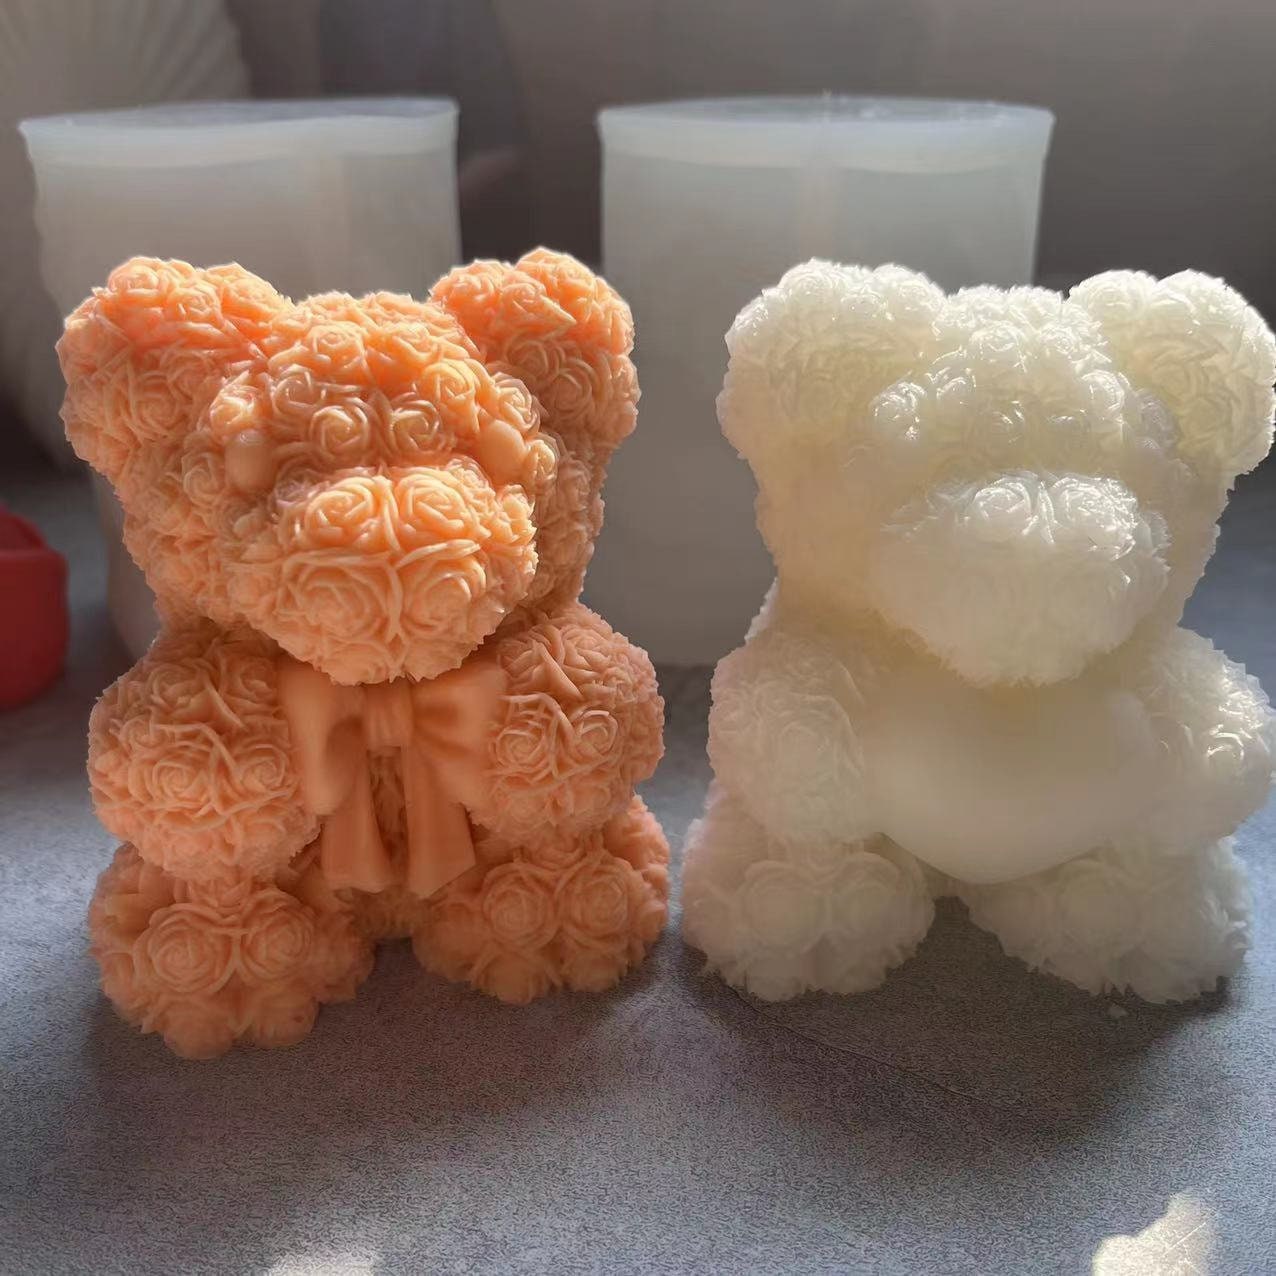 3D Bear Candle Silicone Mold-heart Bear Candle Mold-teddy Bear Candle Mold-animal  Candle Mold-epoxy Resin Mold-diy Aromatherapy Plaster Mold 